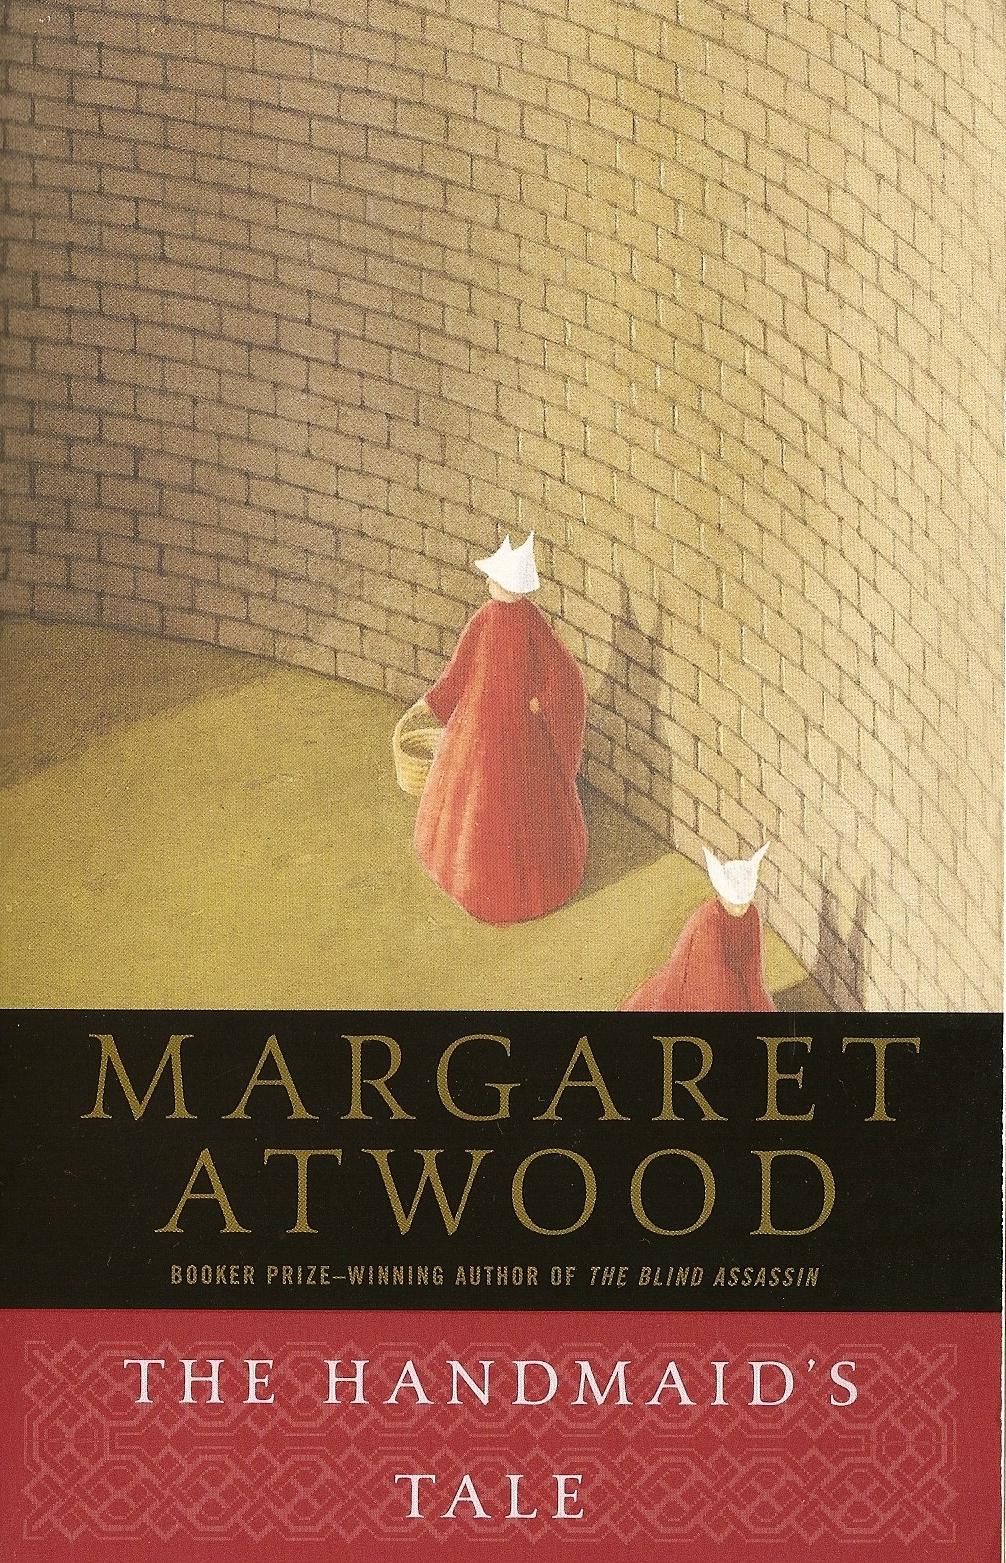 Image result for the handmaid's tale cover